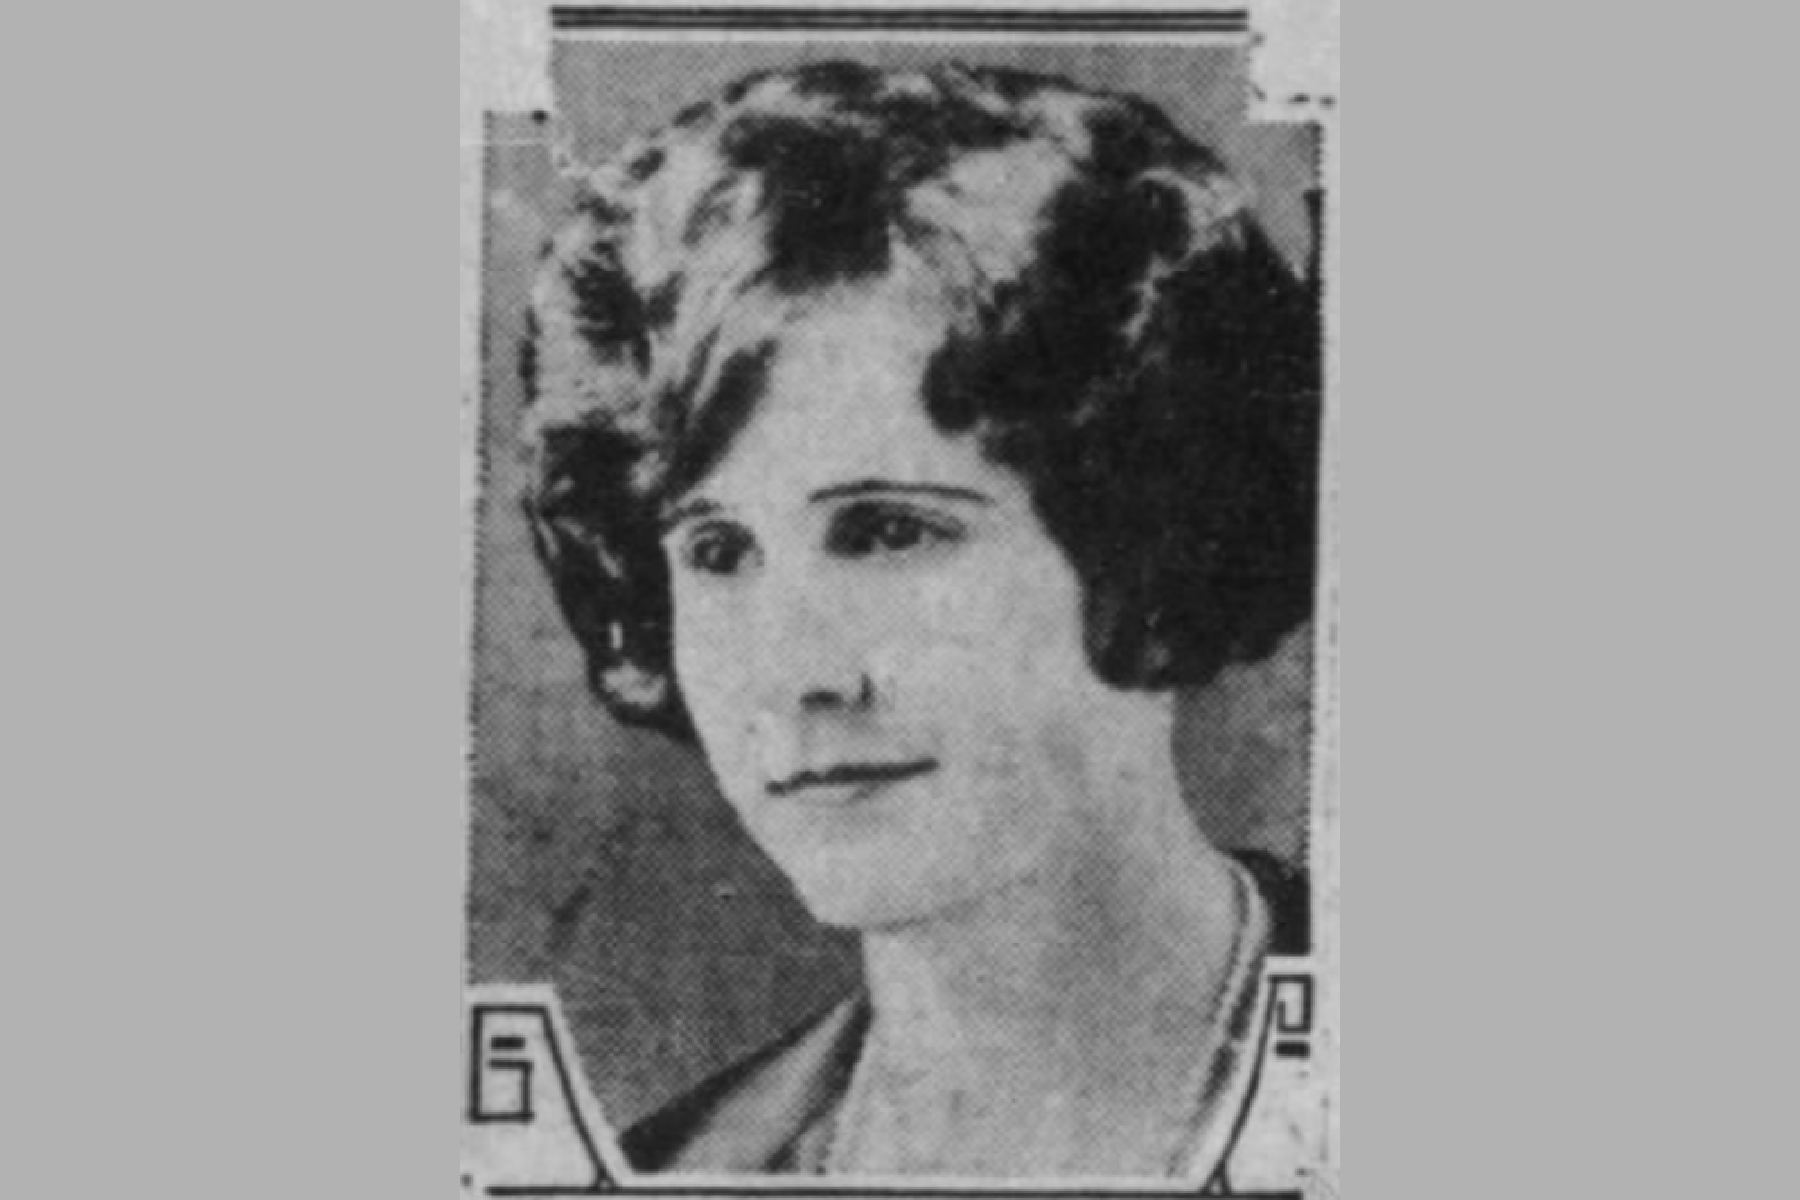 94 years since the night that shook West Plains: Kitty McFarland’s notable story brought to light